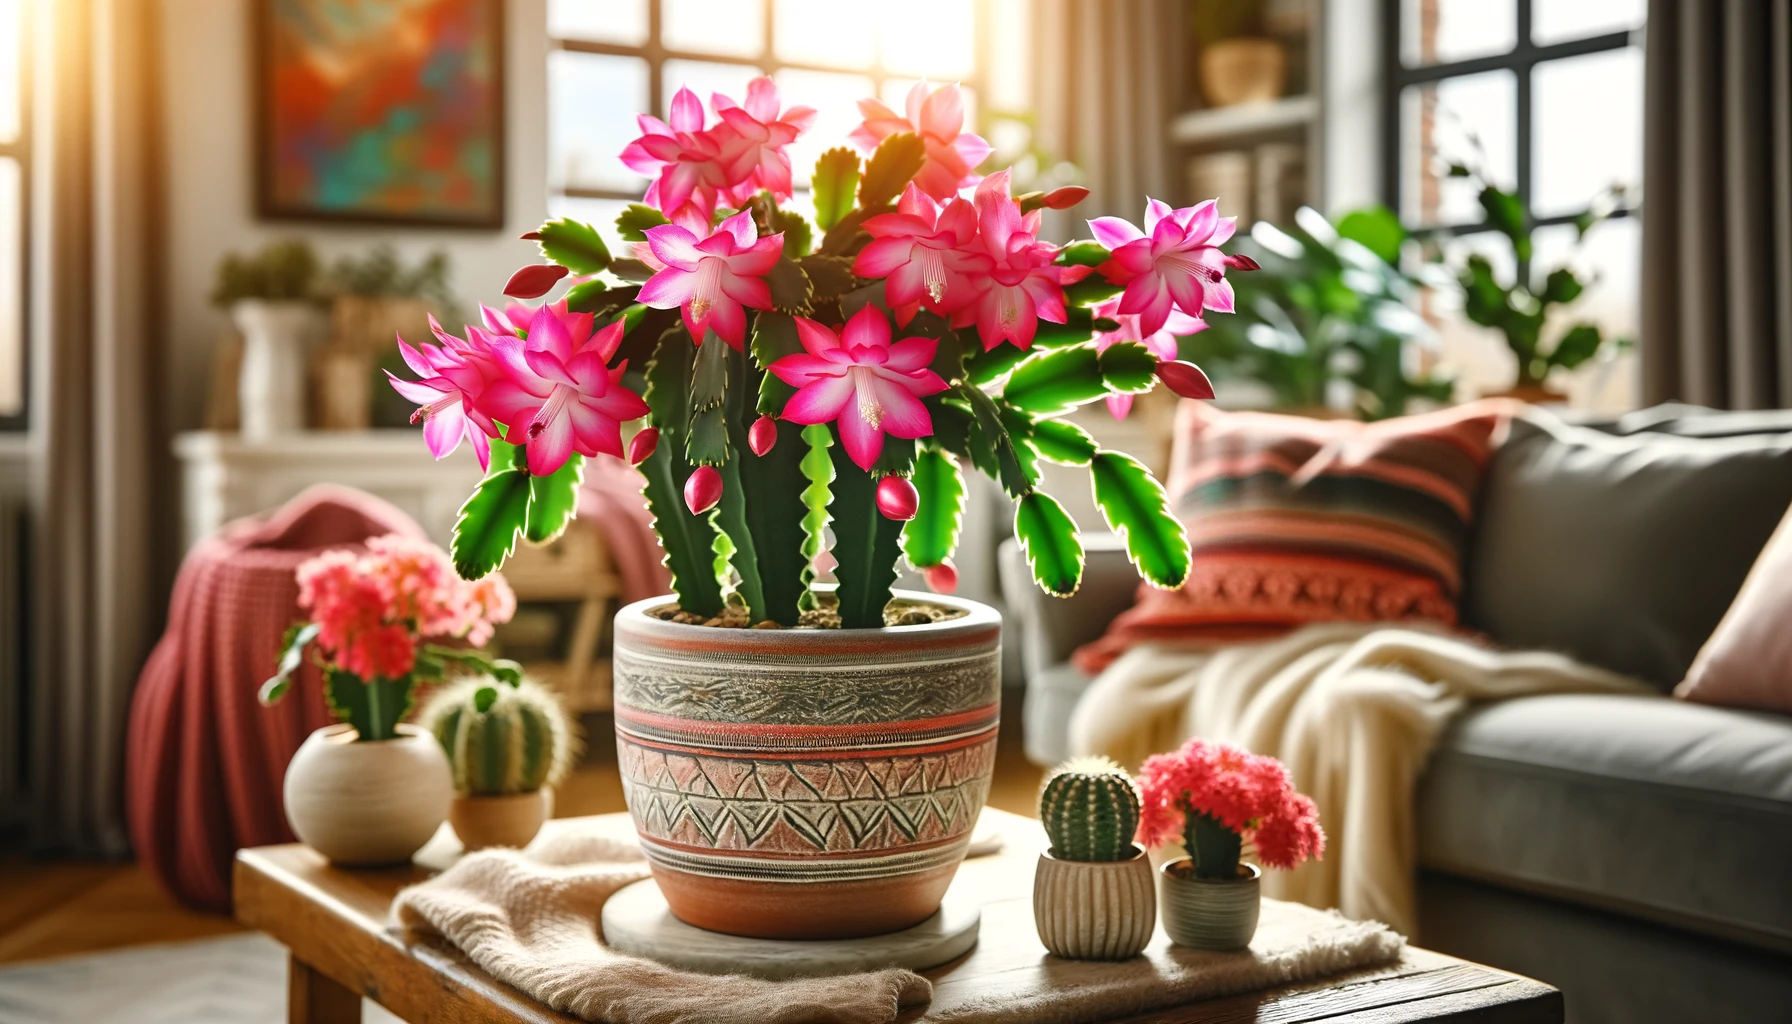 Blooming Christmas cactus on a living room table